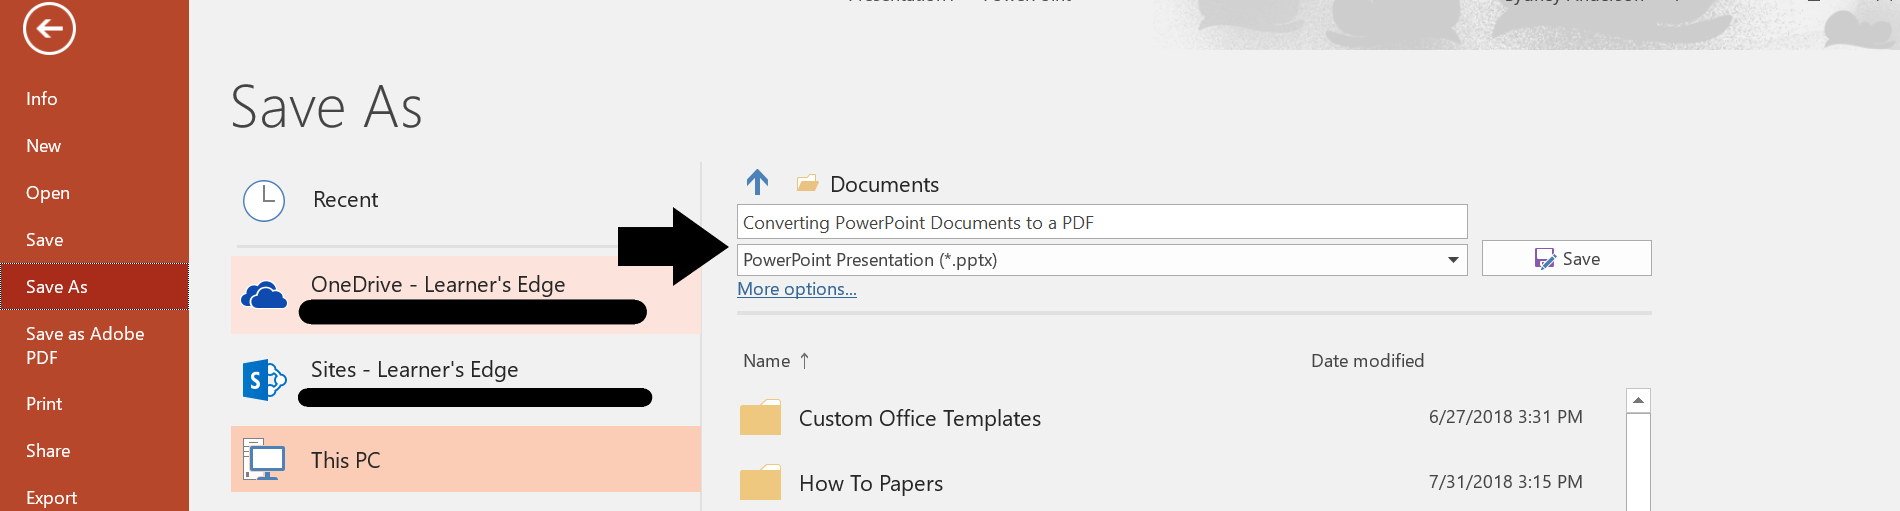 PowerPoint - Save as PPT